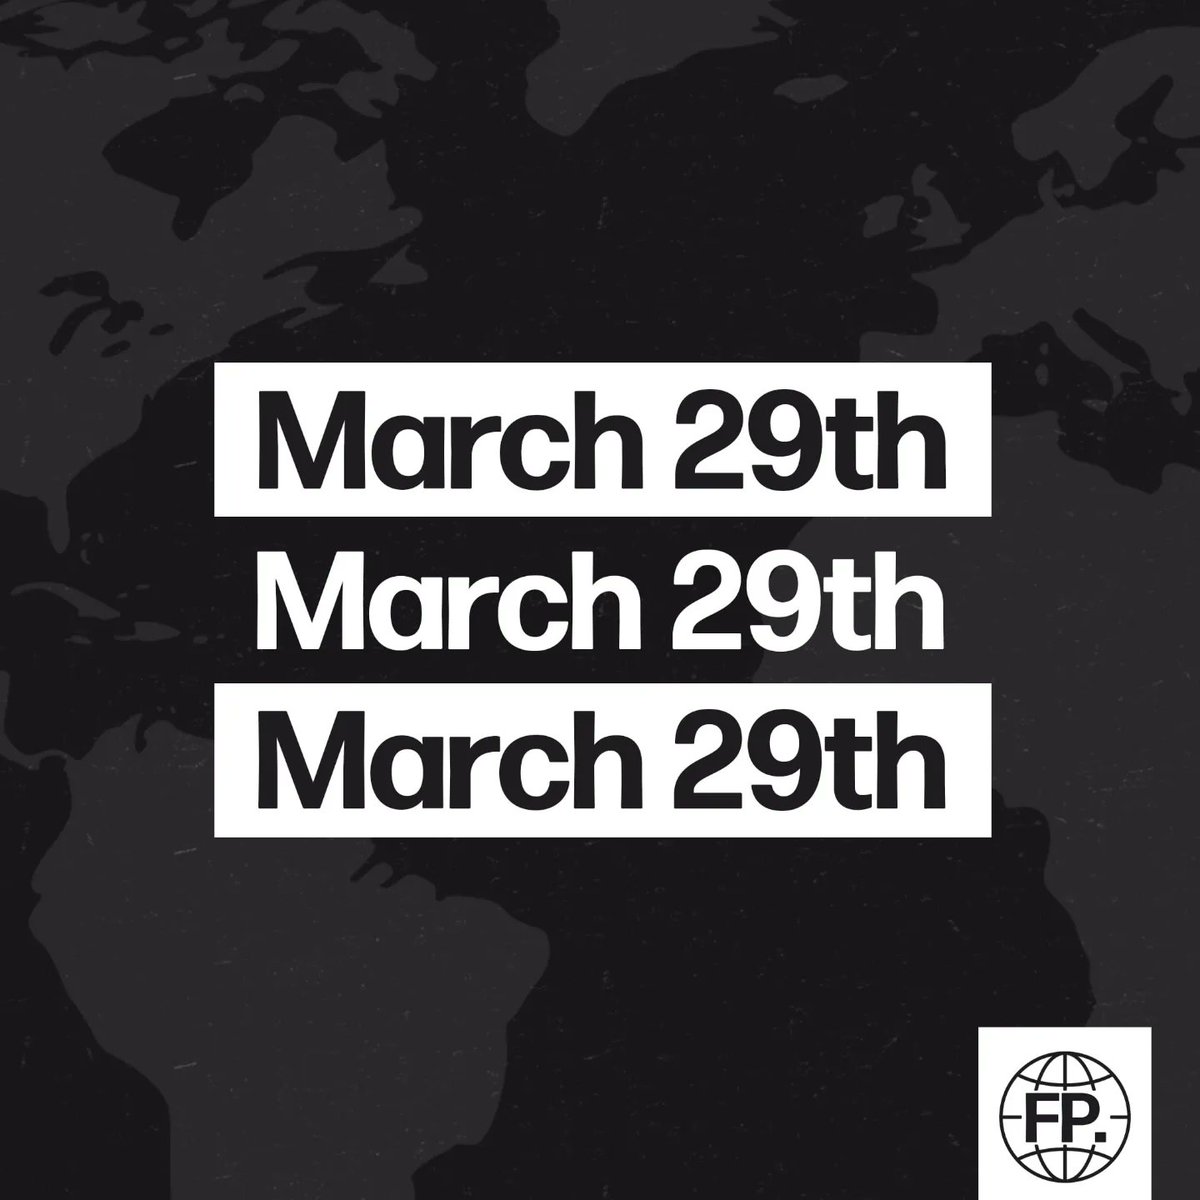 Mark your calendars!

The wait is almost over...

Our first collection & website goes live at the end of the month. 

You'll also be able to catch us at the @maverickskate Tywyn Skatepark opening jam on March 30th with some free goodies.